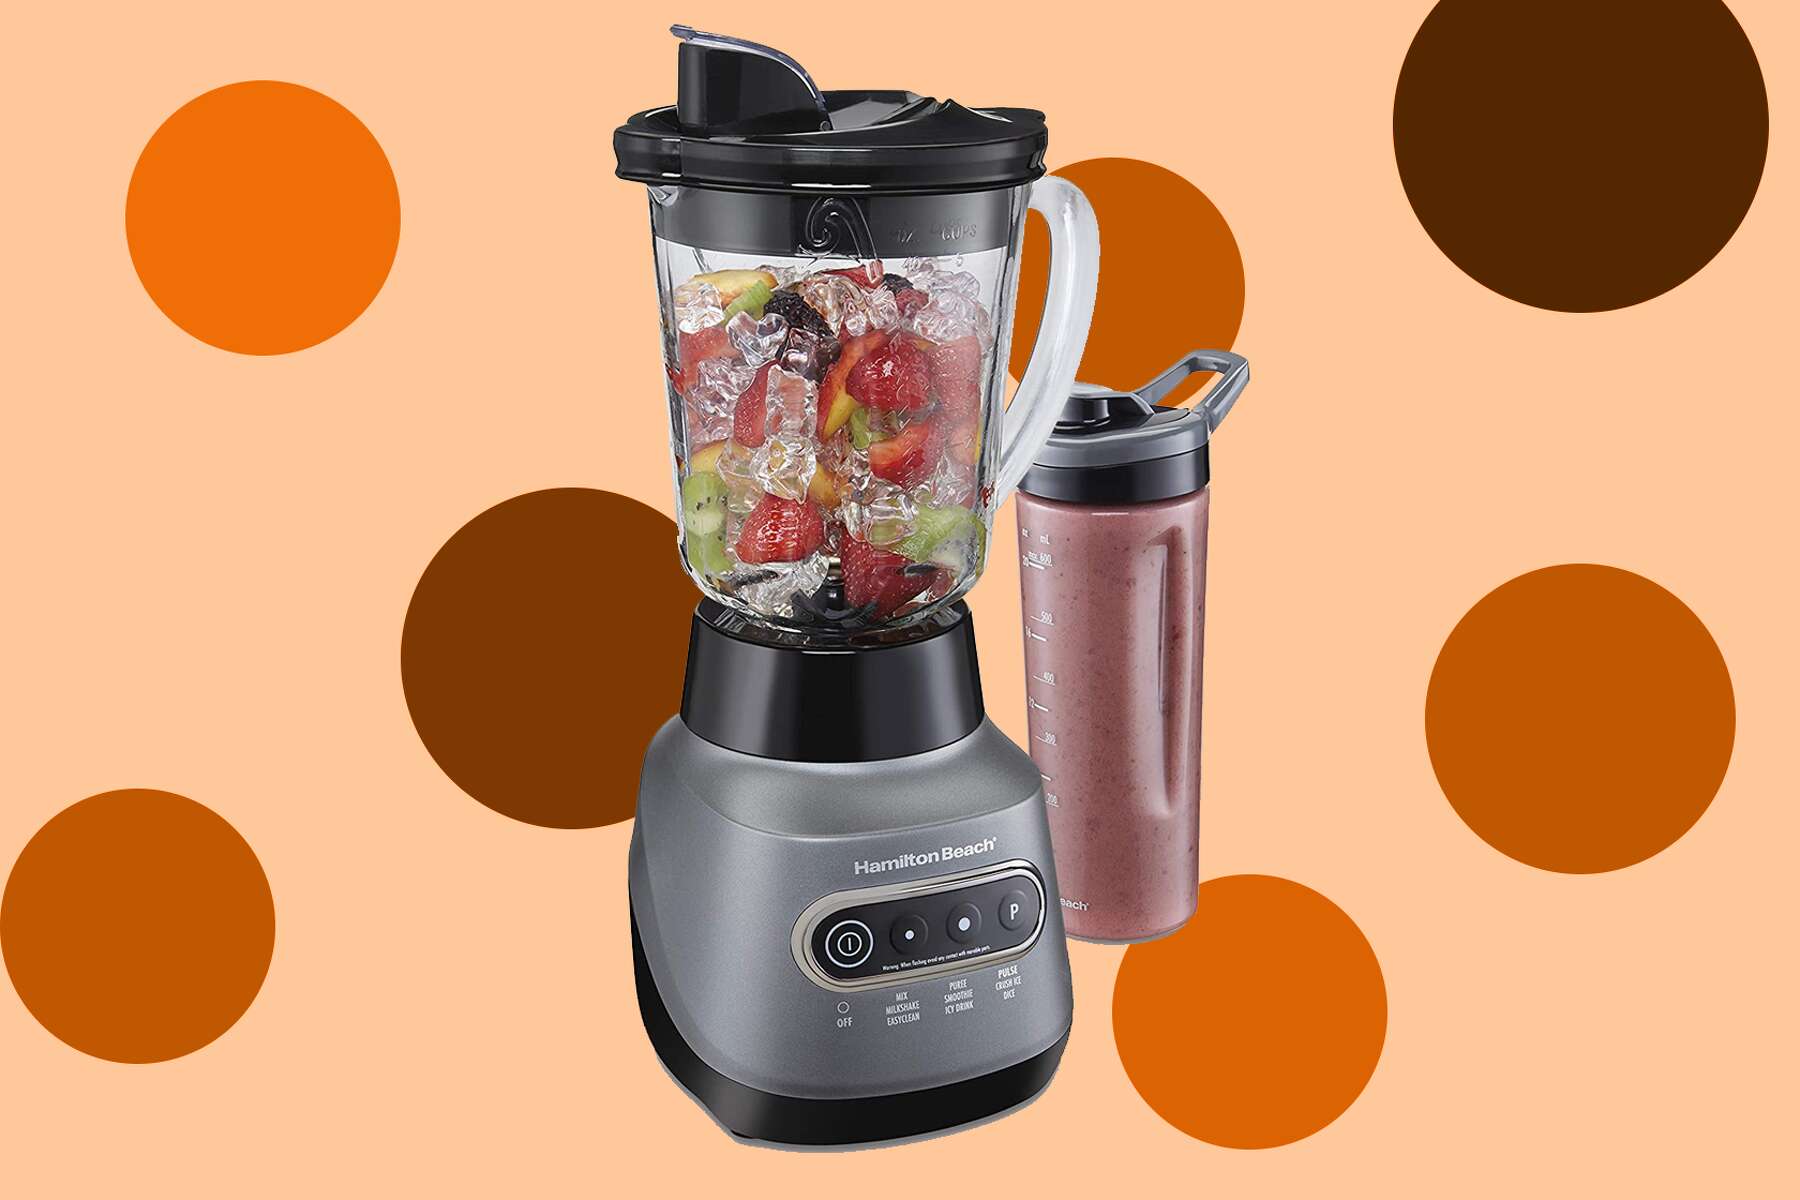 This ice-crushing Hamilton Beach blender is $25 off today